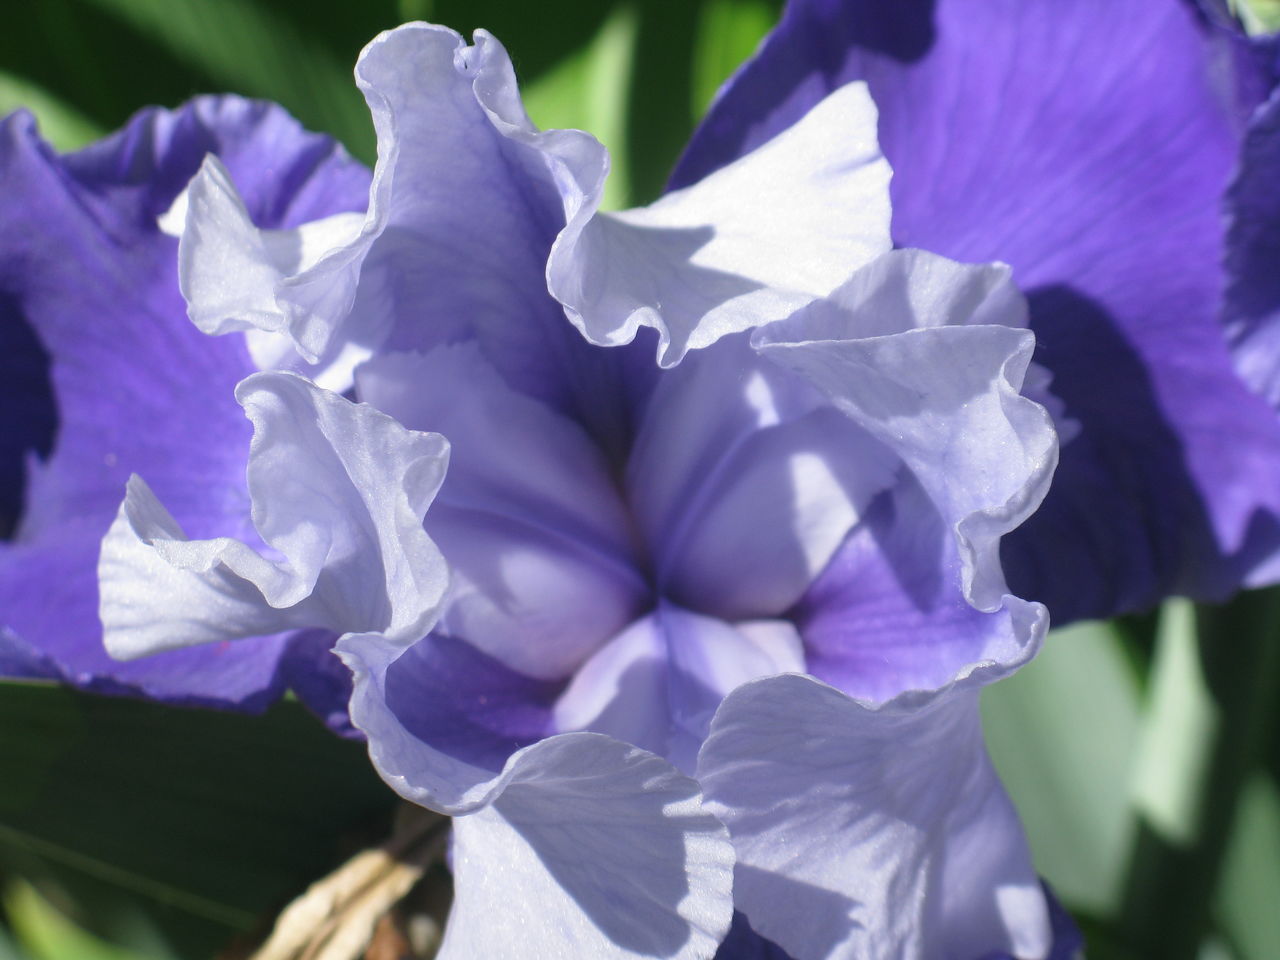 flower, flowering plant, plant, freshness, purple, beauty in nature, petal, close-up, fragility, inflorescence, growth, flower head, nature, iris, blue, leaf, plant part, no people, springtime, blossom, focus on foreground, outdoors, botany, sunlight, macro photography, day, selective focus